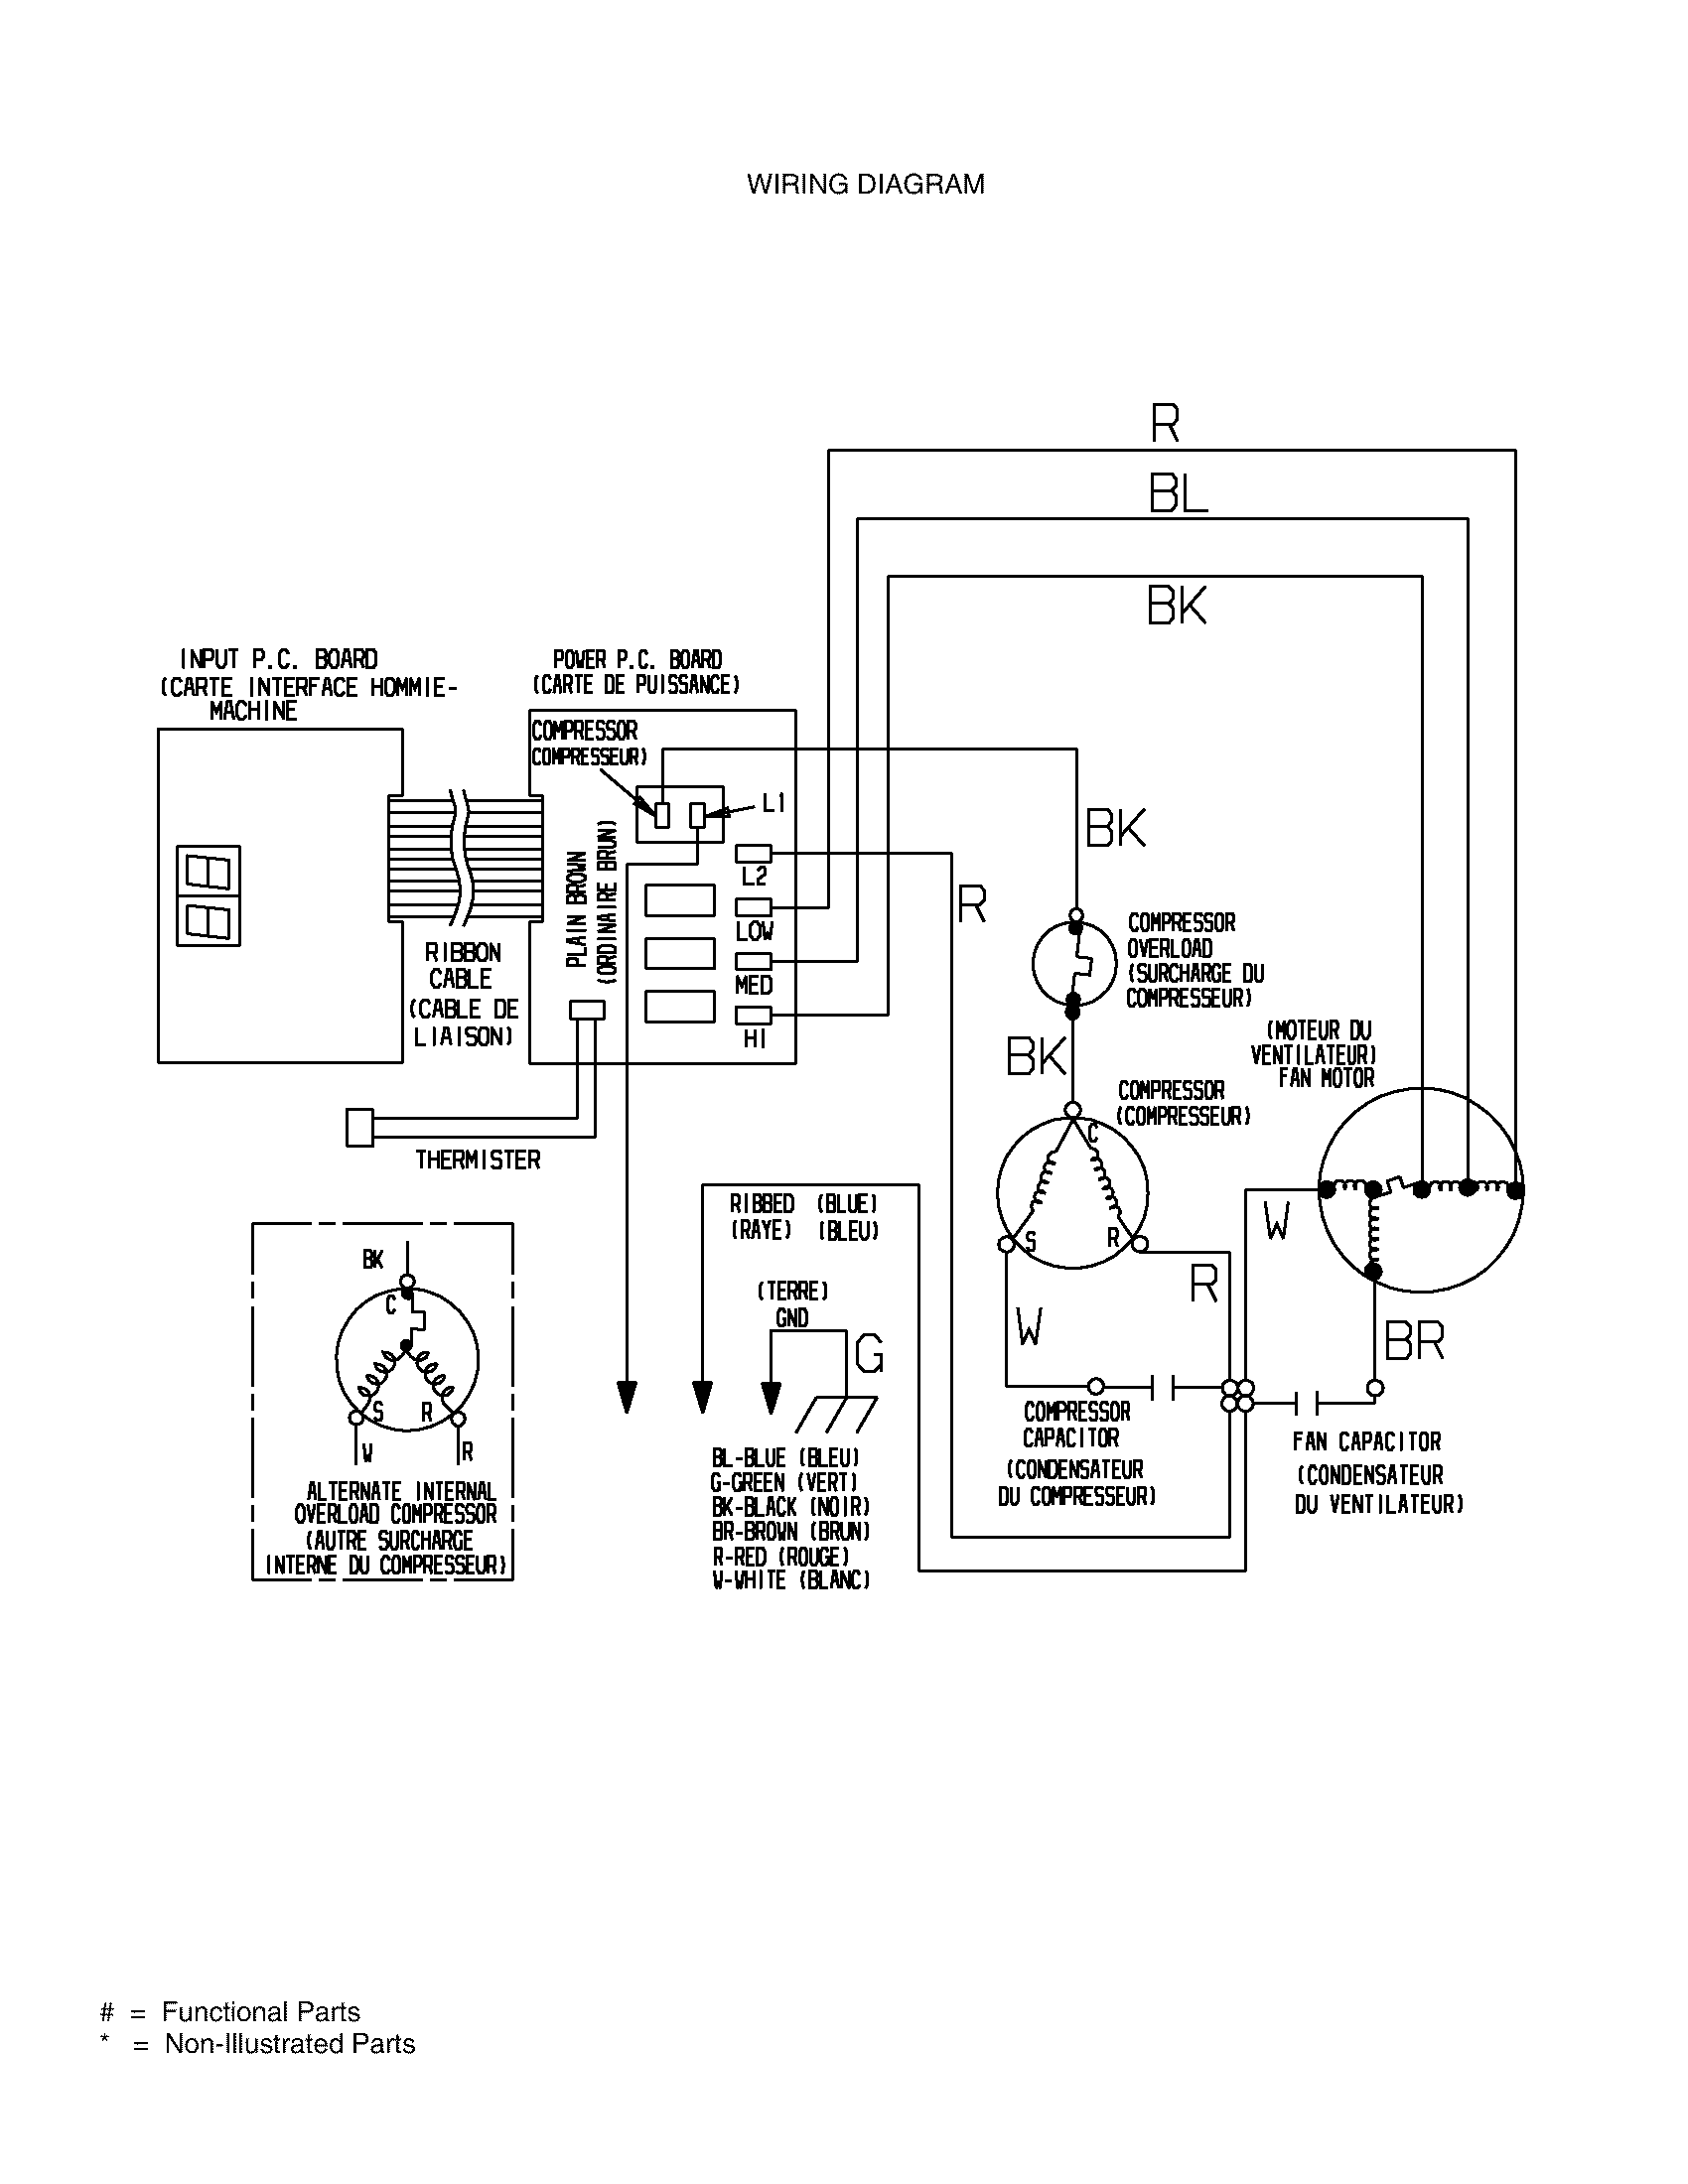 Trane Xv95 Thermostat Wiring Diagram from getdrawings.com